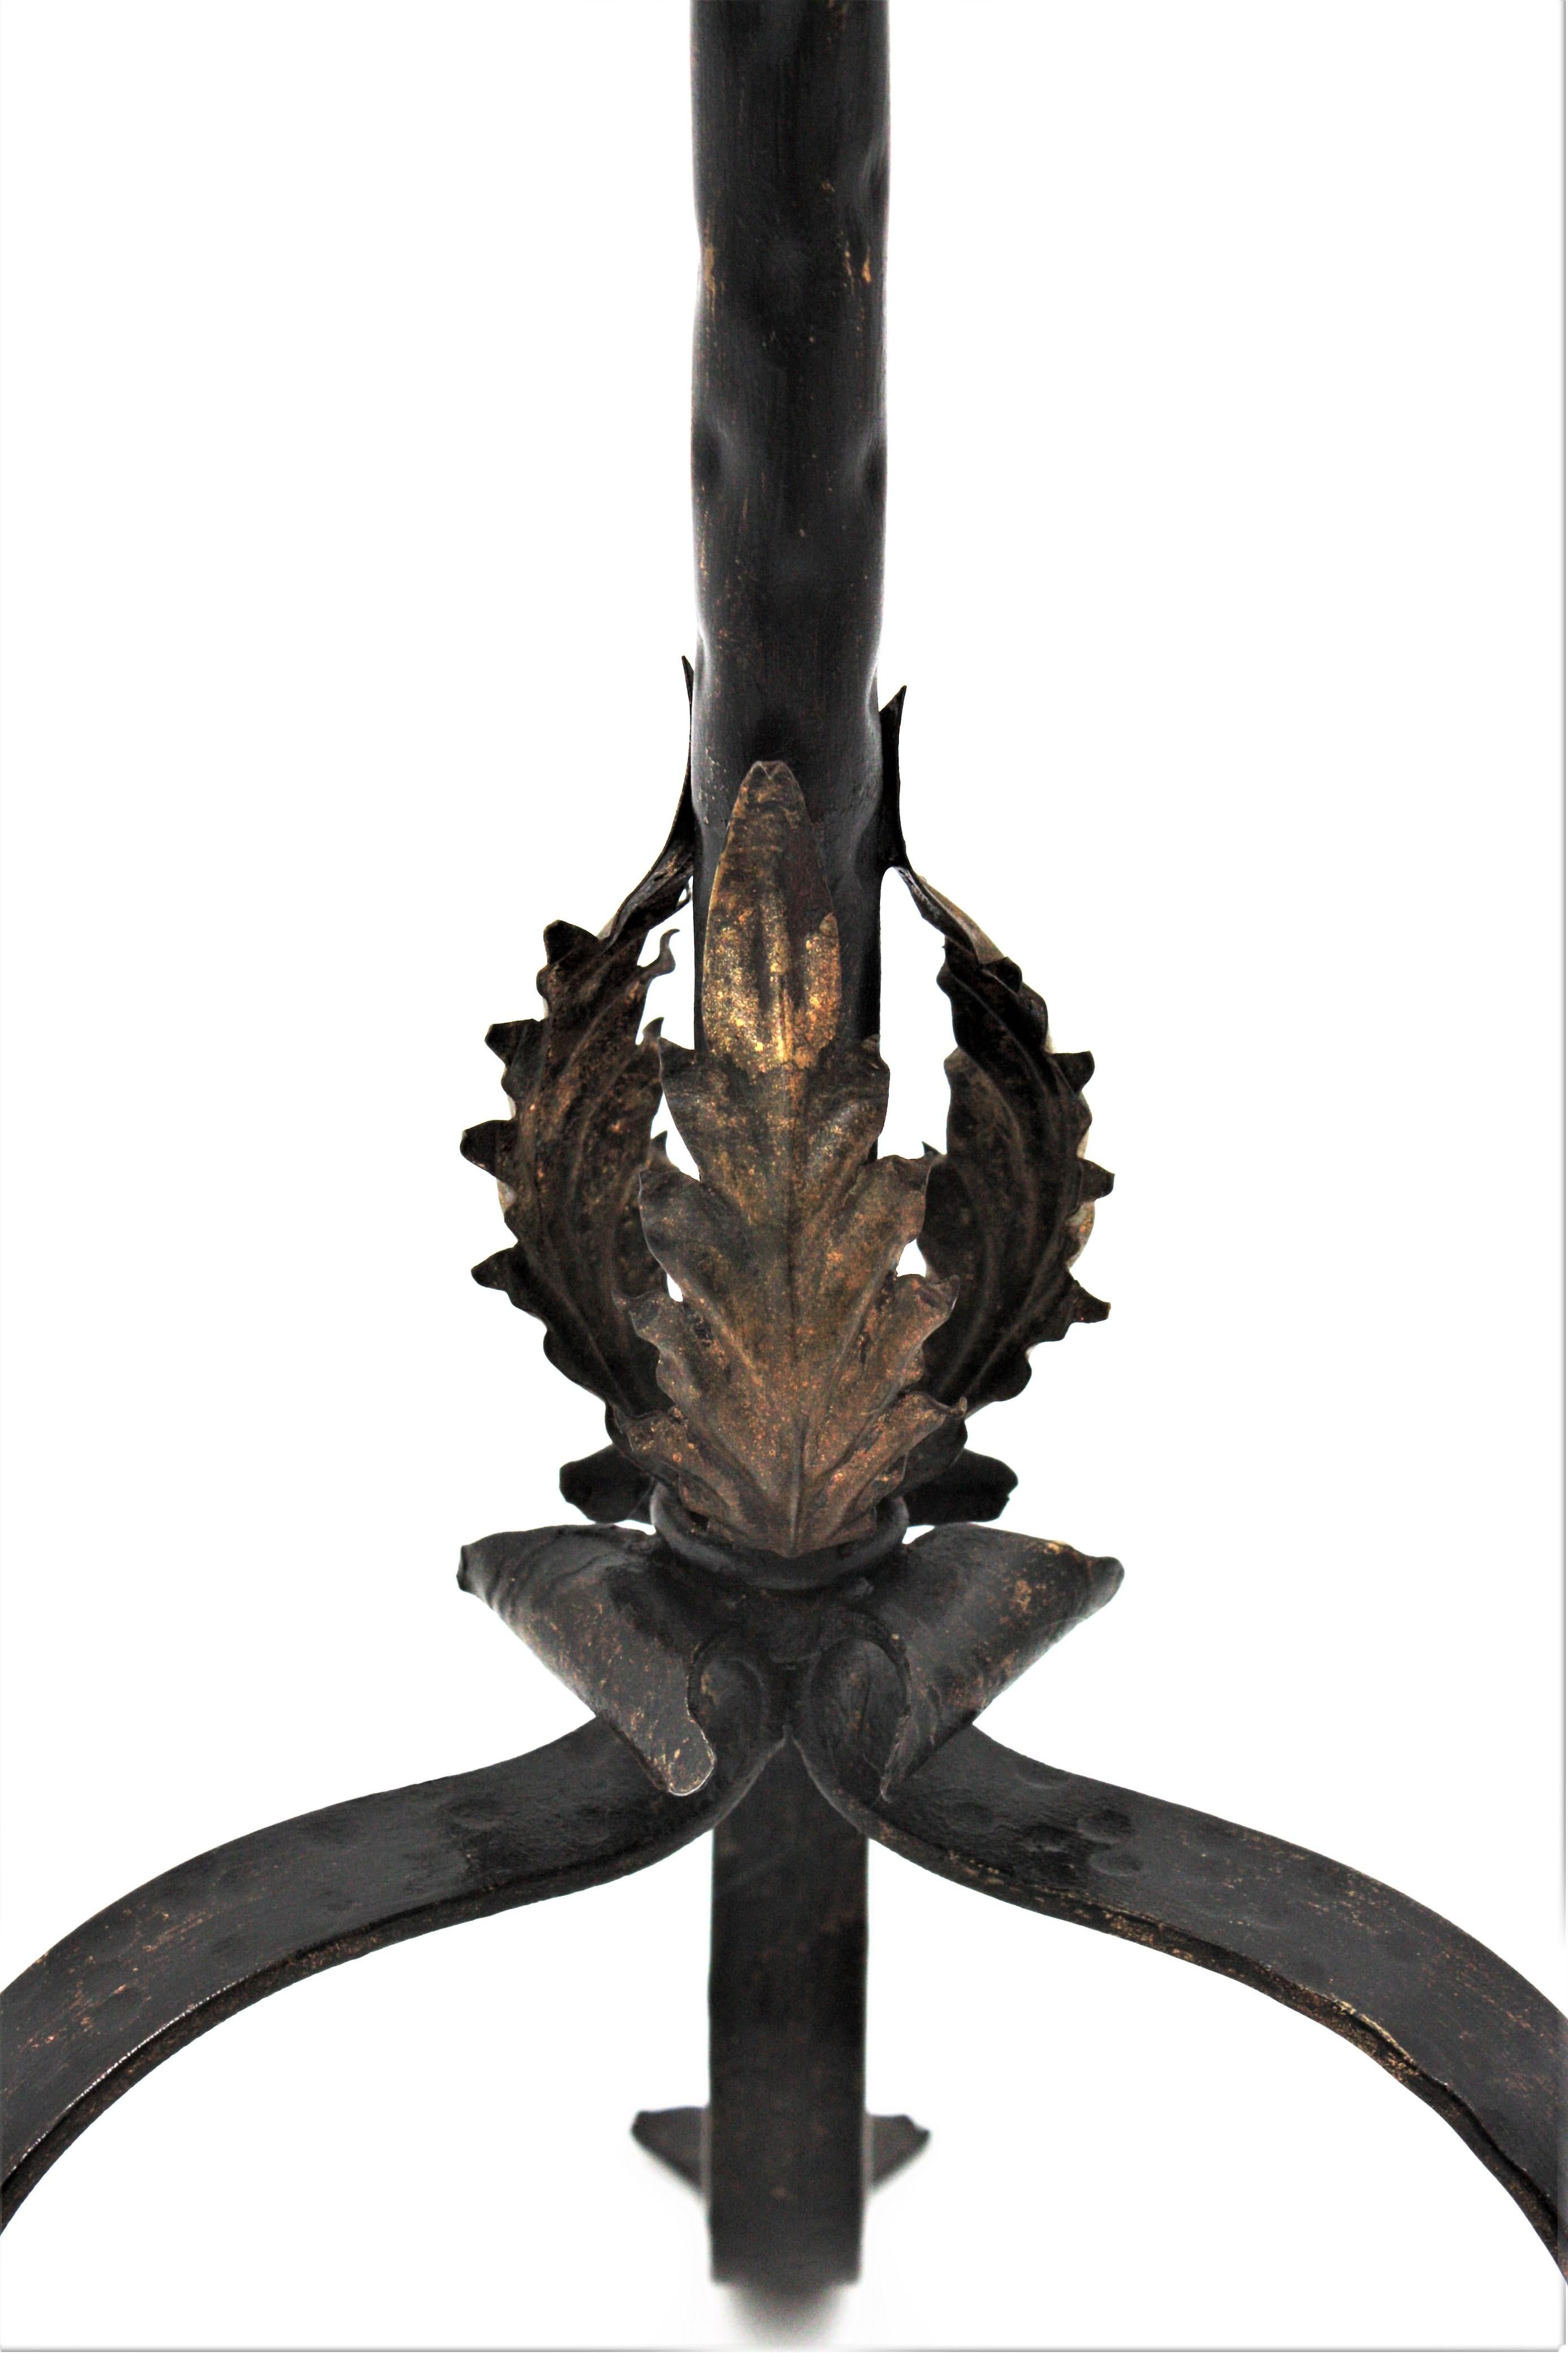 Spanish black painted hand-hammered iron gueridon, end table or cocktails table with gilt iron leaves decorations. Spain, 1940s.
This table was handcrafted in wrought iron and patinated in black with wax finishing. It has three gold gilt iron